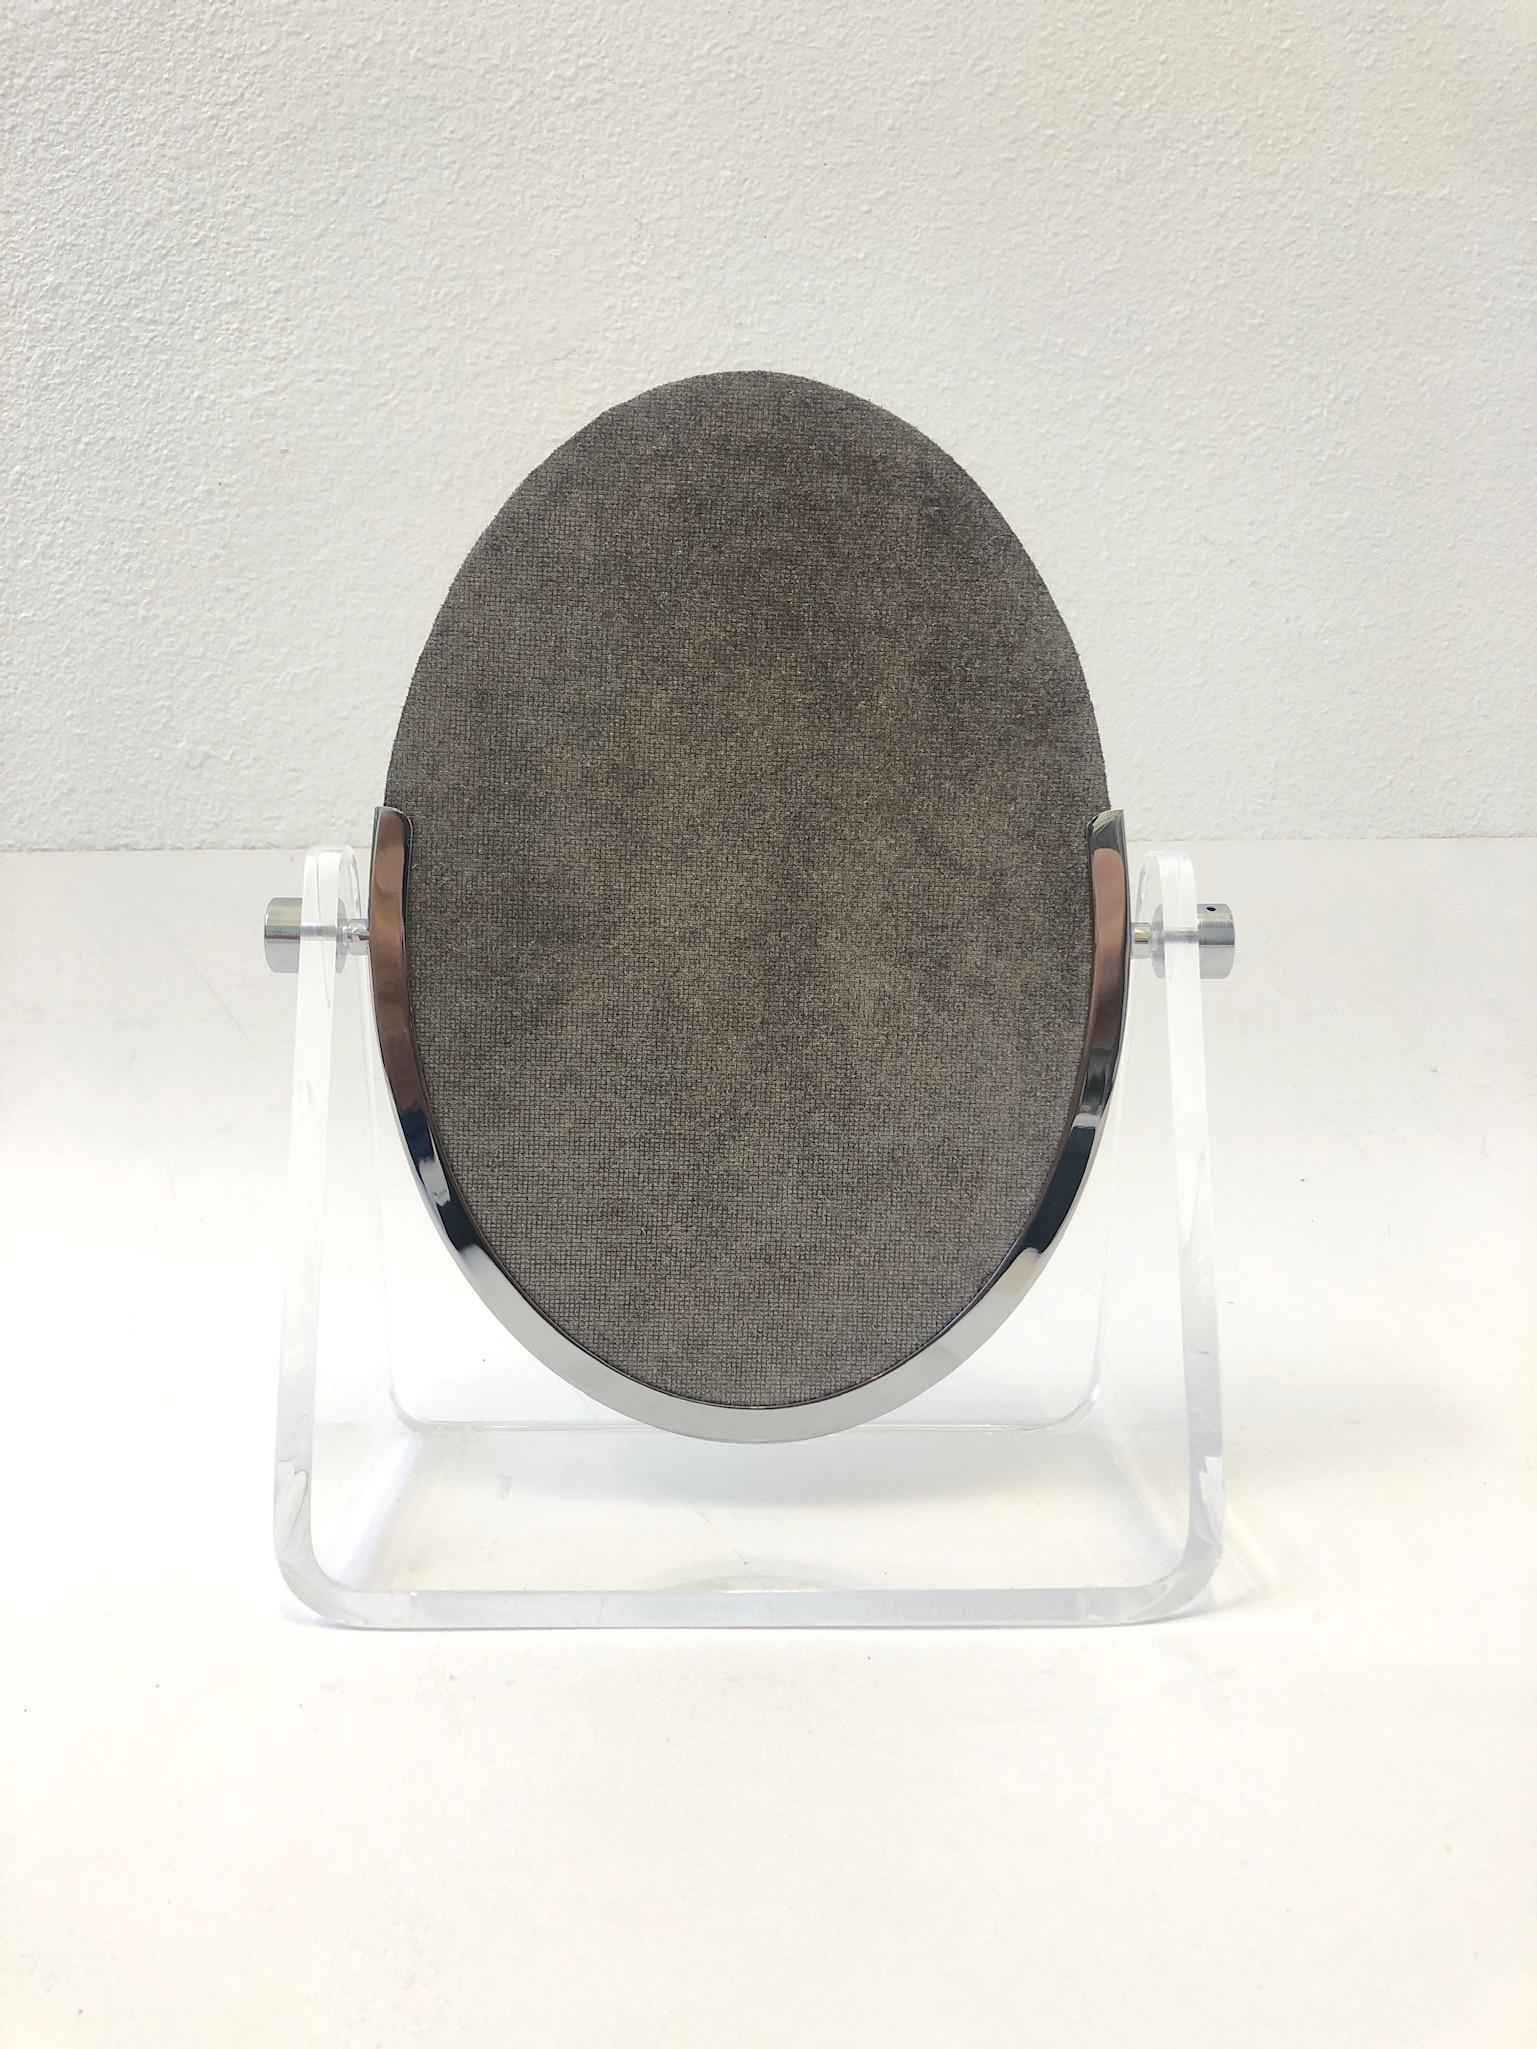 Glamorous 1970’s Lucite and polish chrome vanity mirror by American renowned designer Charles Hollis Jones. 
New mirror with metallic light mocha brown suede back. 
Measurements: 12.75” wide, 6” deep and 15.75” high.